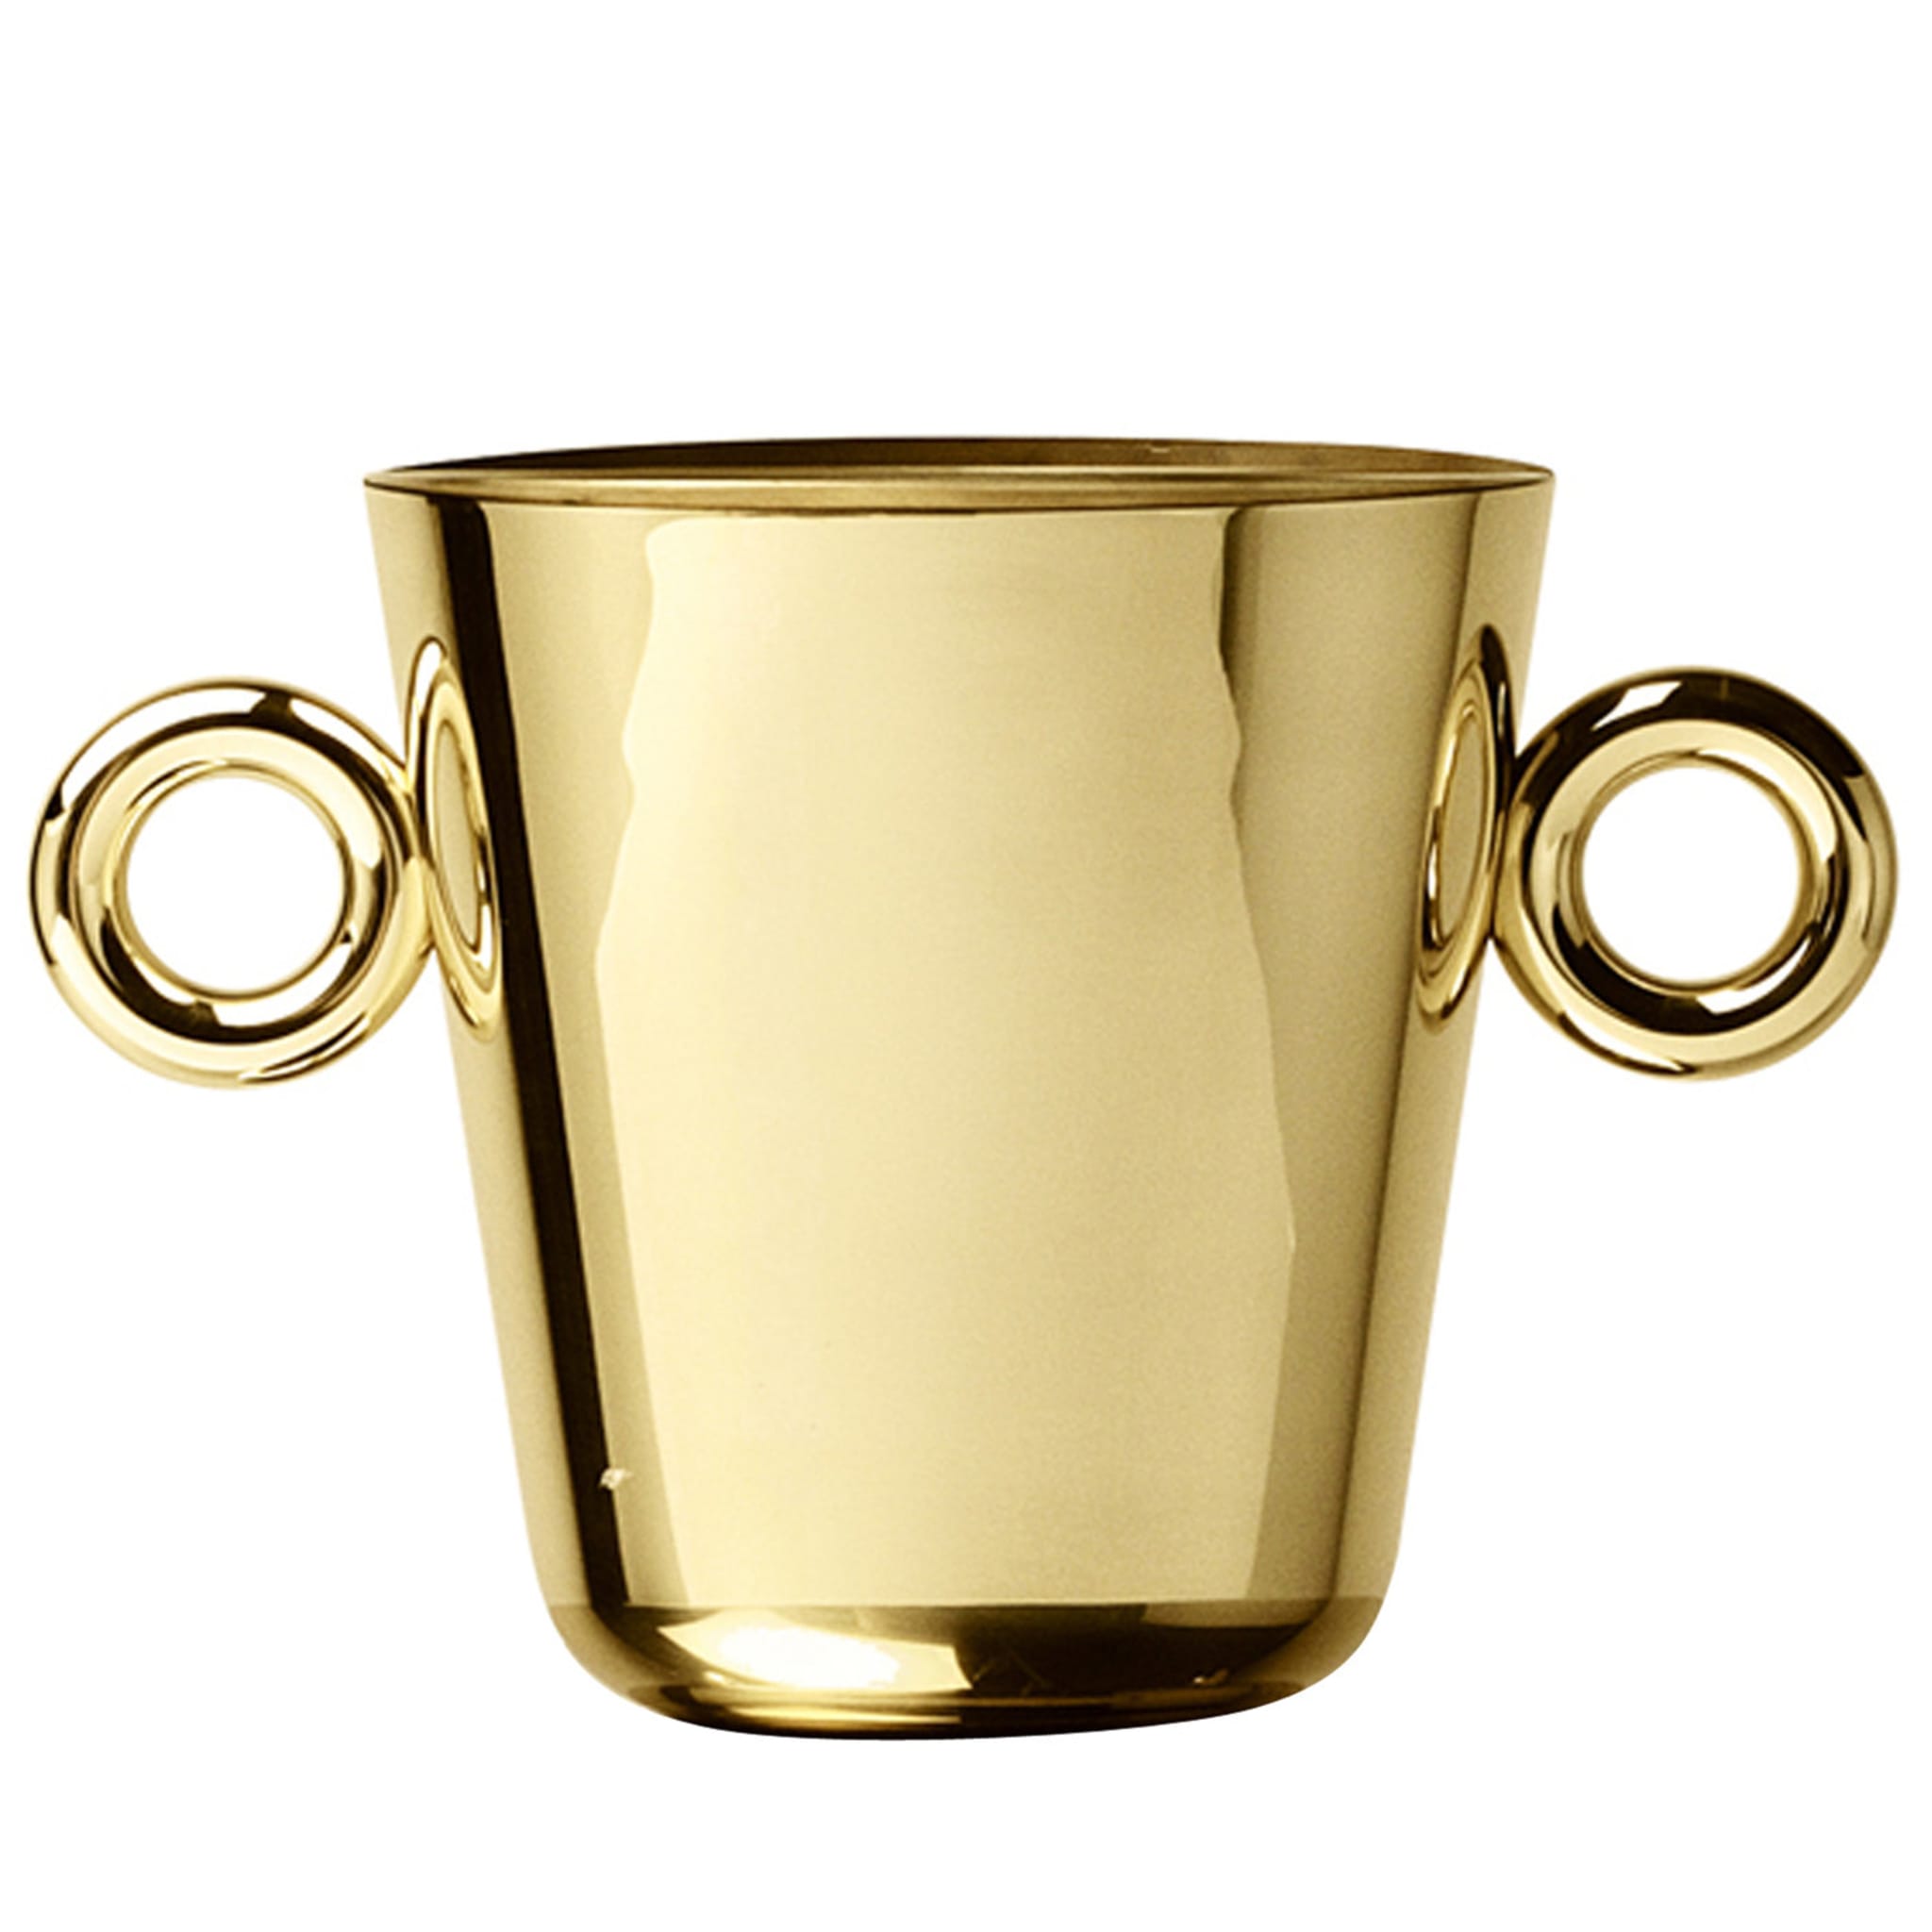 Double O Ice Bucket in Polished Brass Finish By Richard Hutten - Alternative view 1